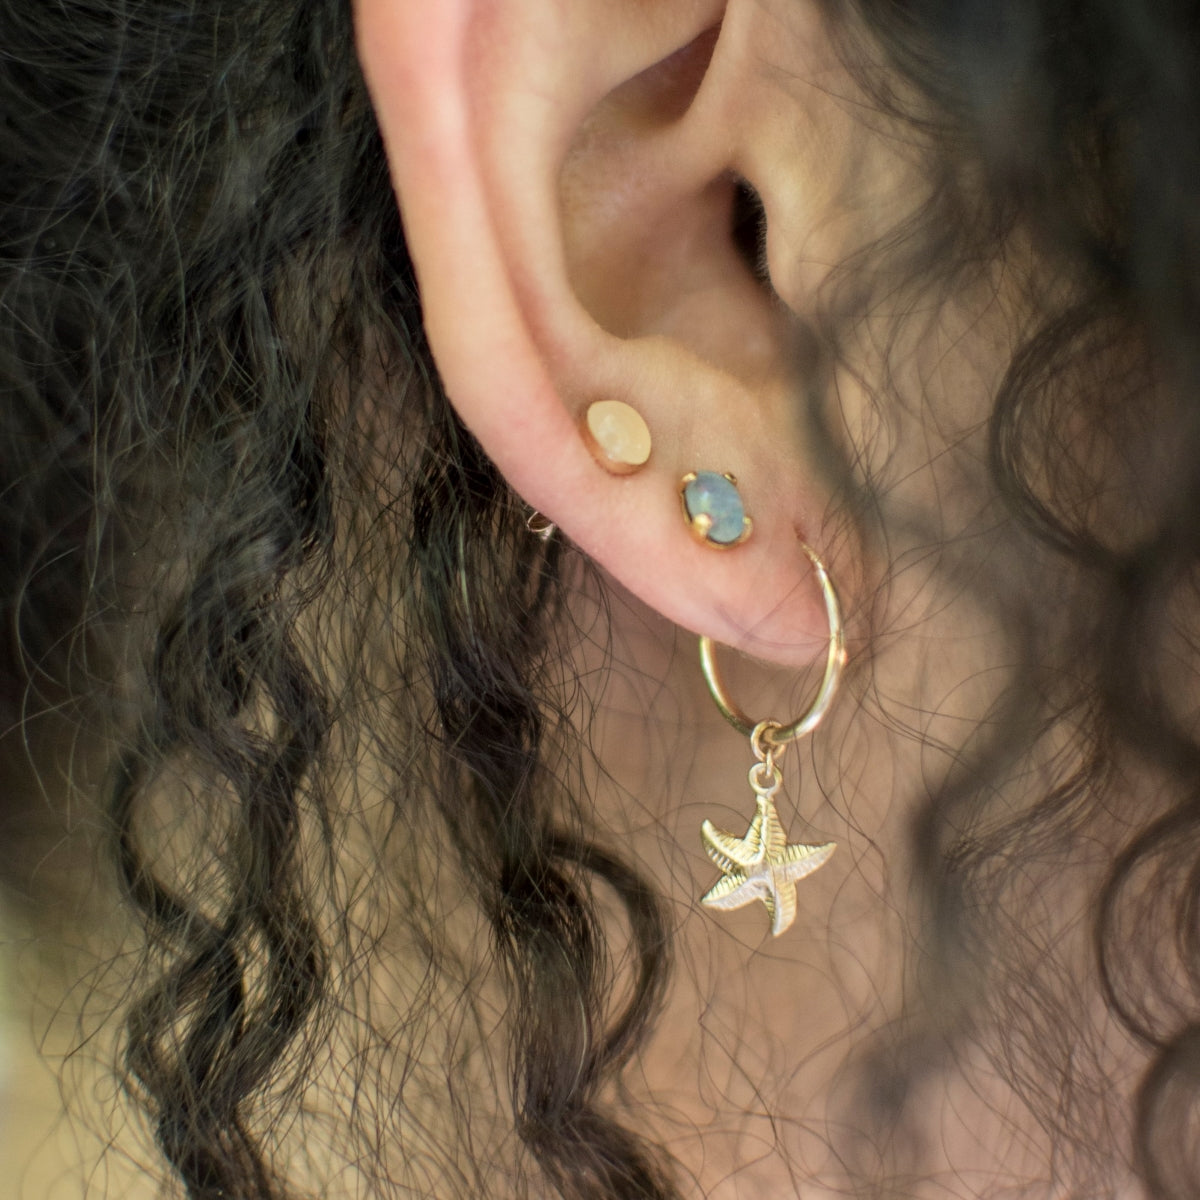 rose quartz studs paired with amazonite and the starfish charmed earrings